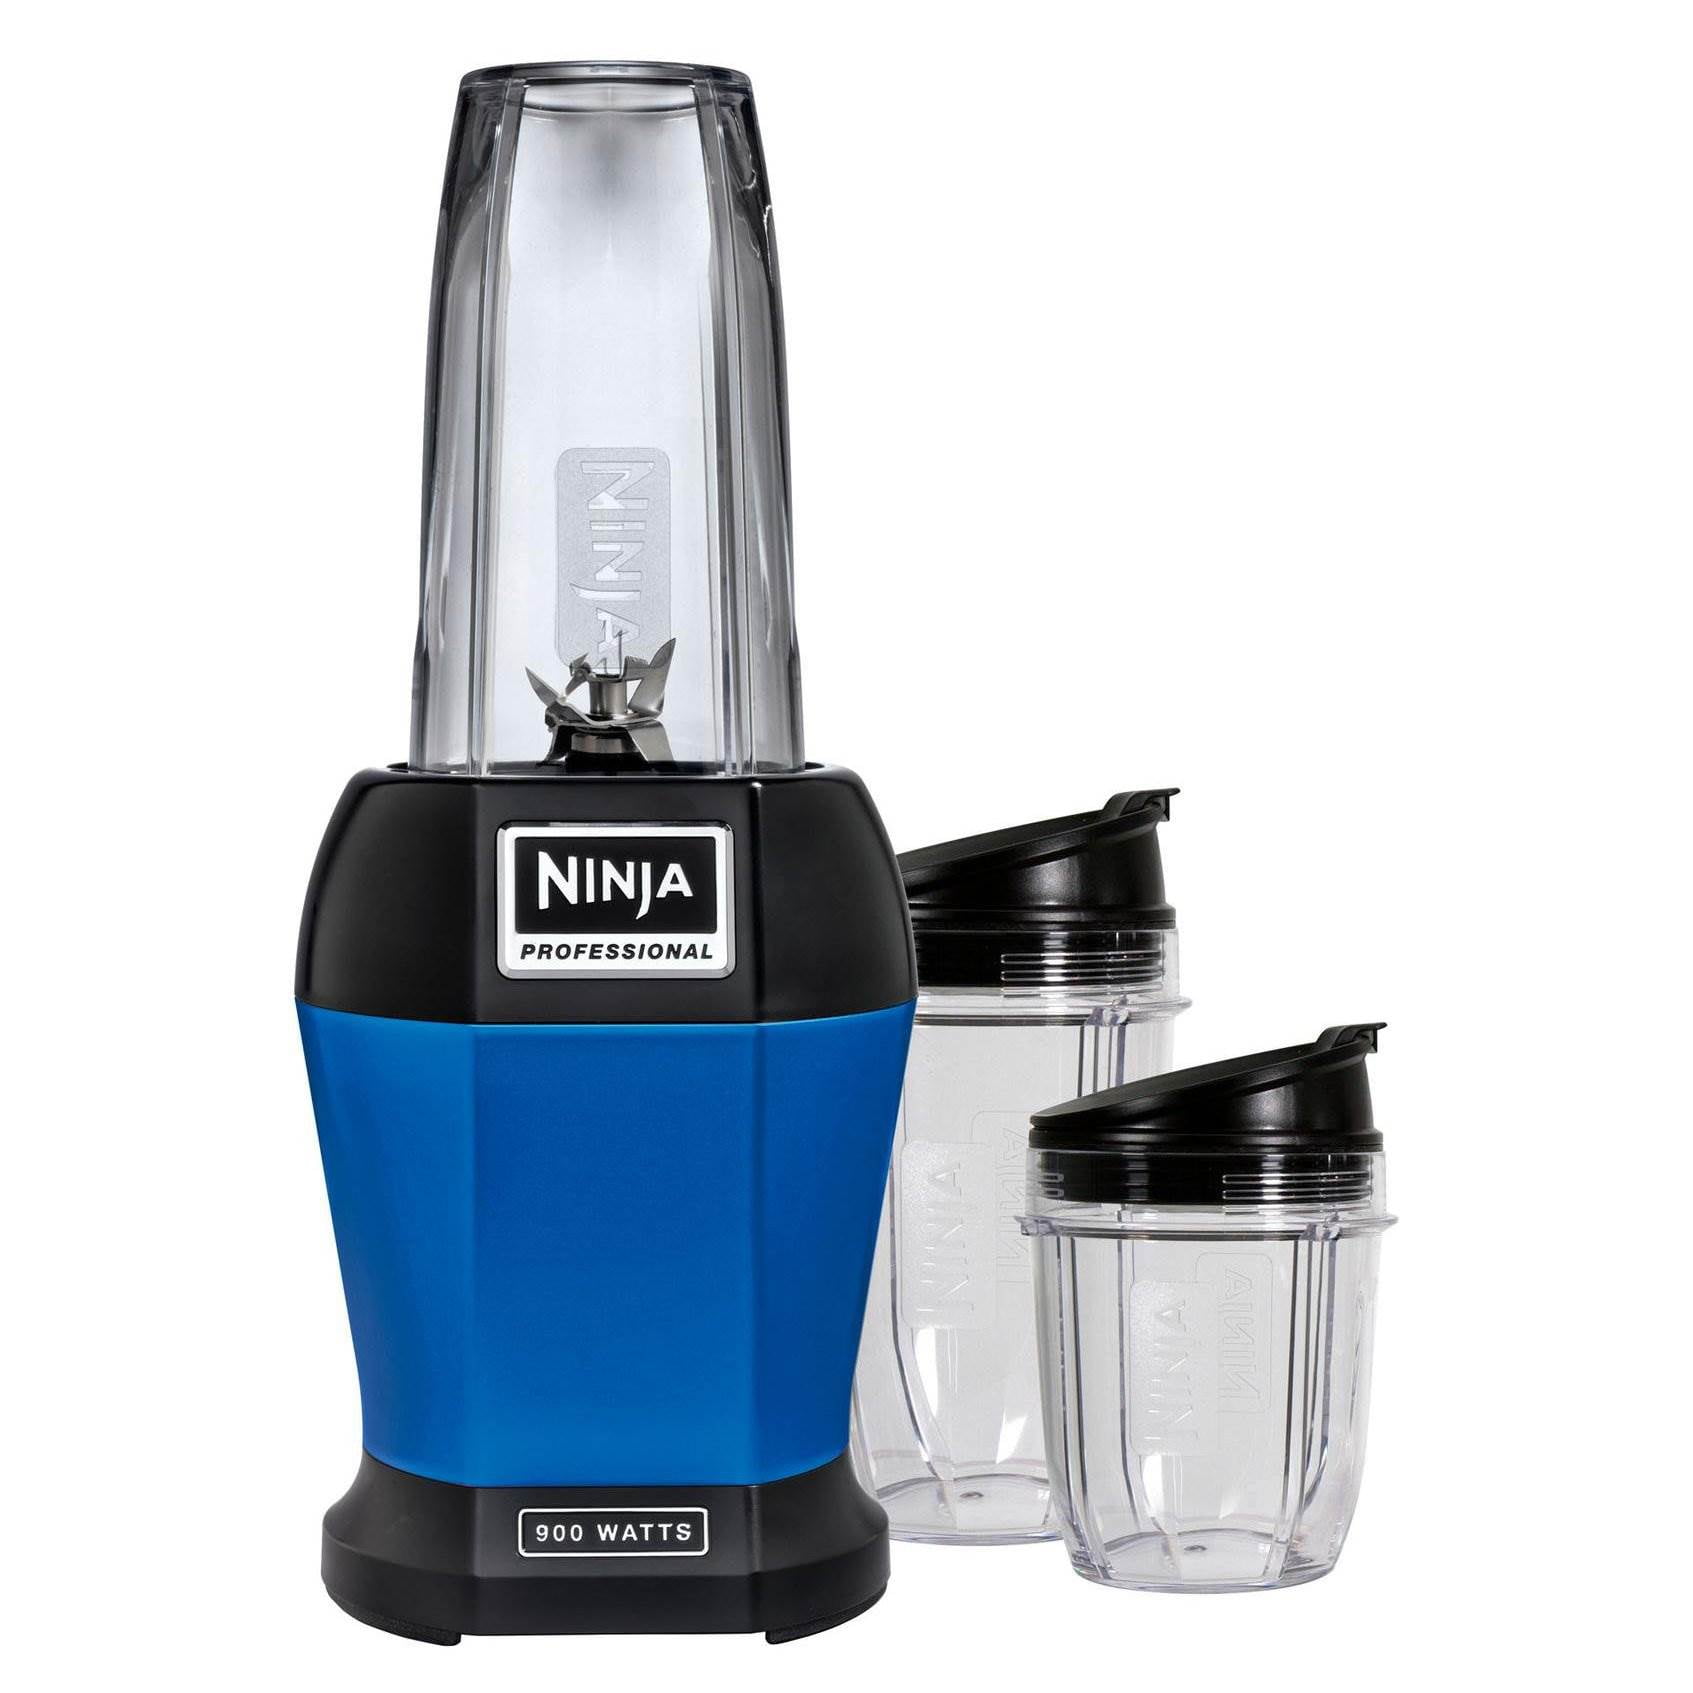 Nutri Ninja Pro Personal Blender with 900 Watt Base and Vitamin and Nutrient